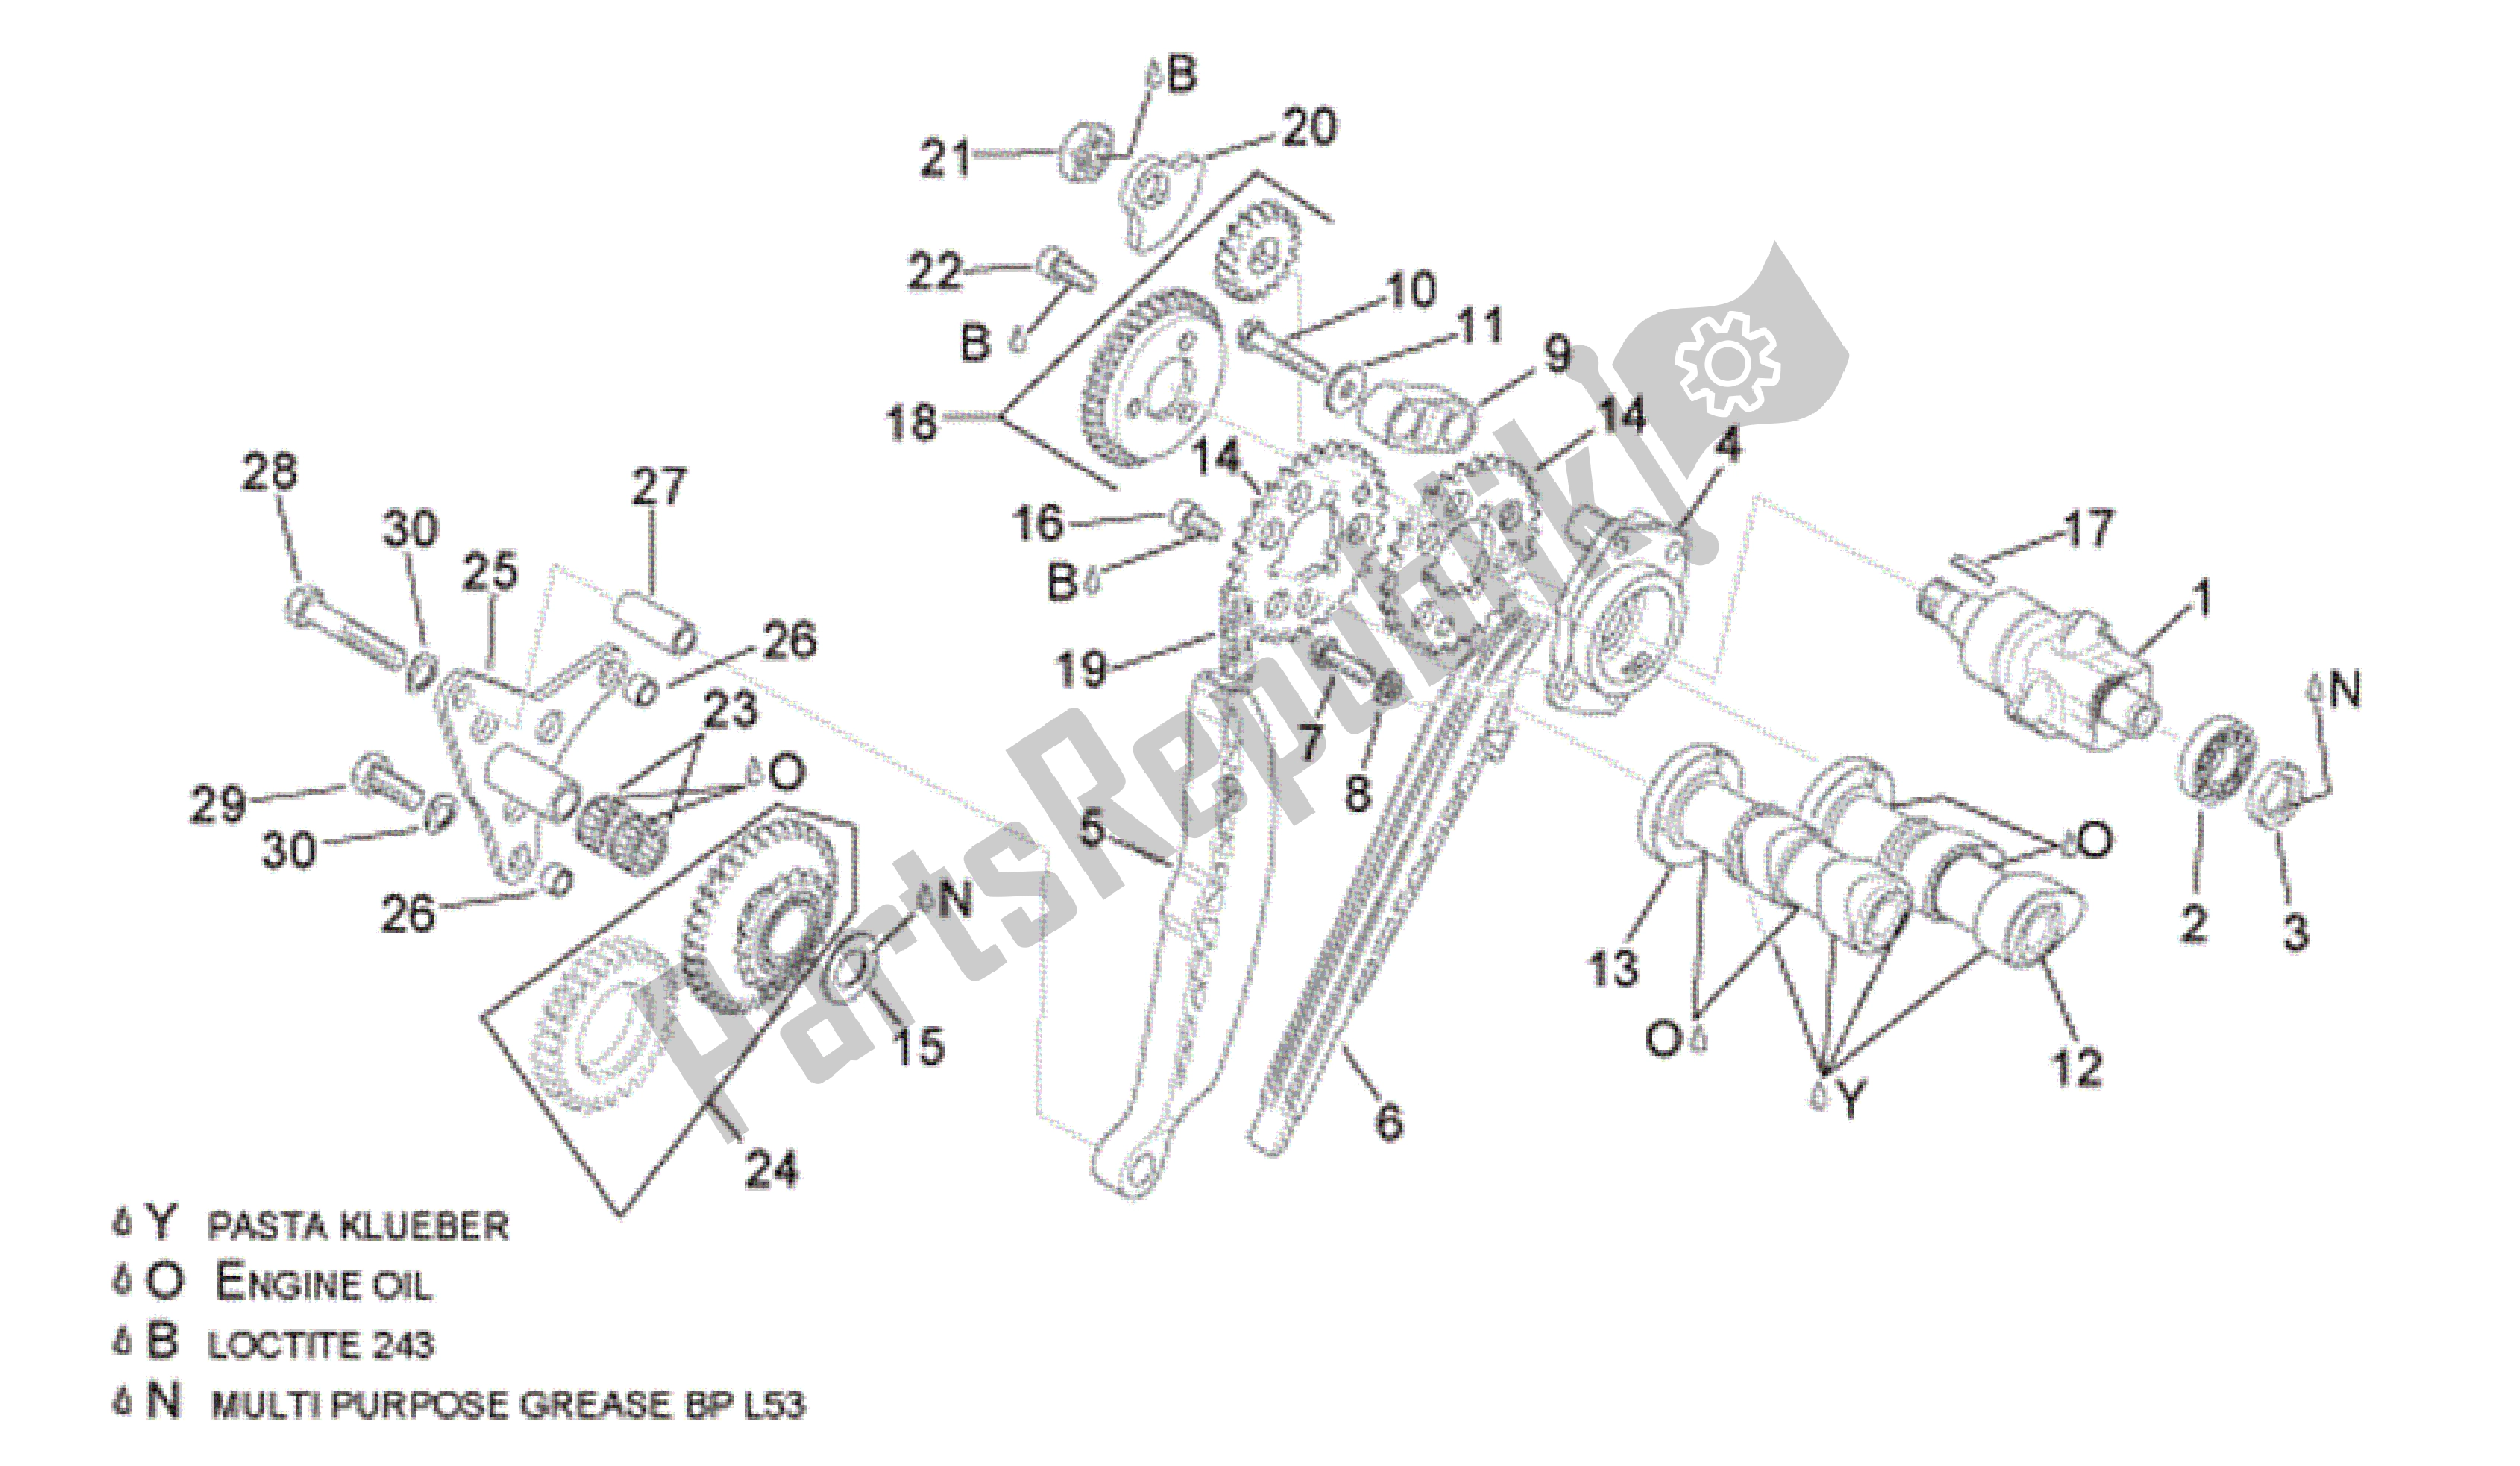 All parts for the Rear Cylinder Timing System of the Aprilia RSV Tuono R 3985 1000 2006 - 2009